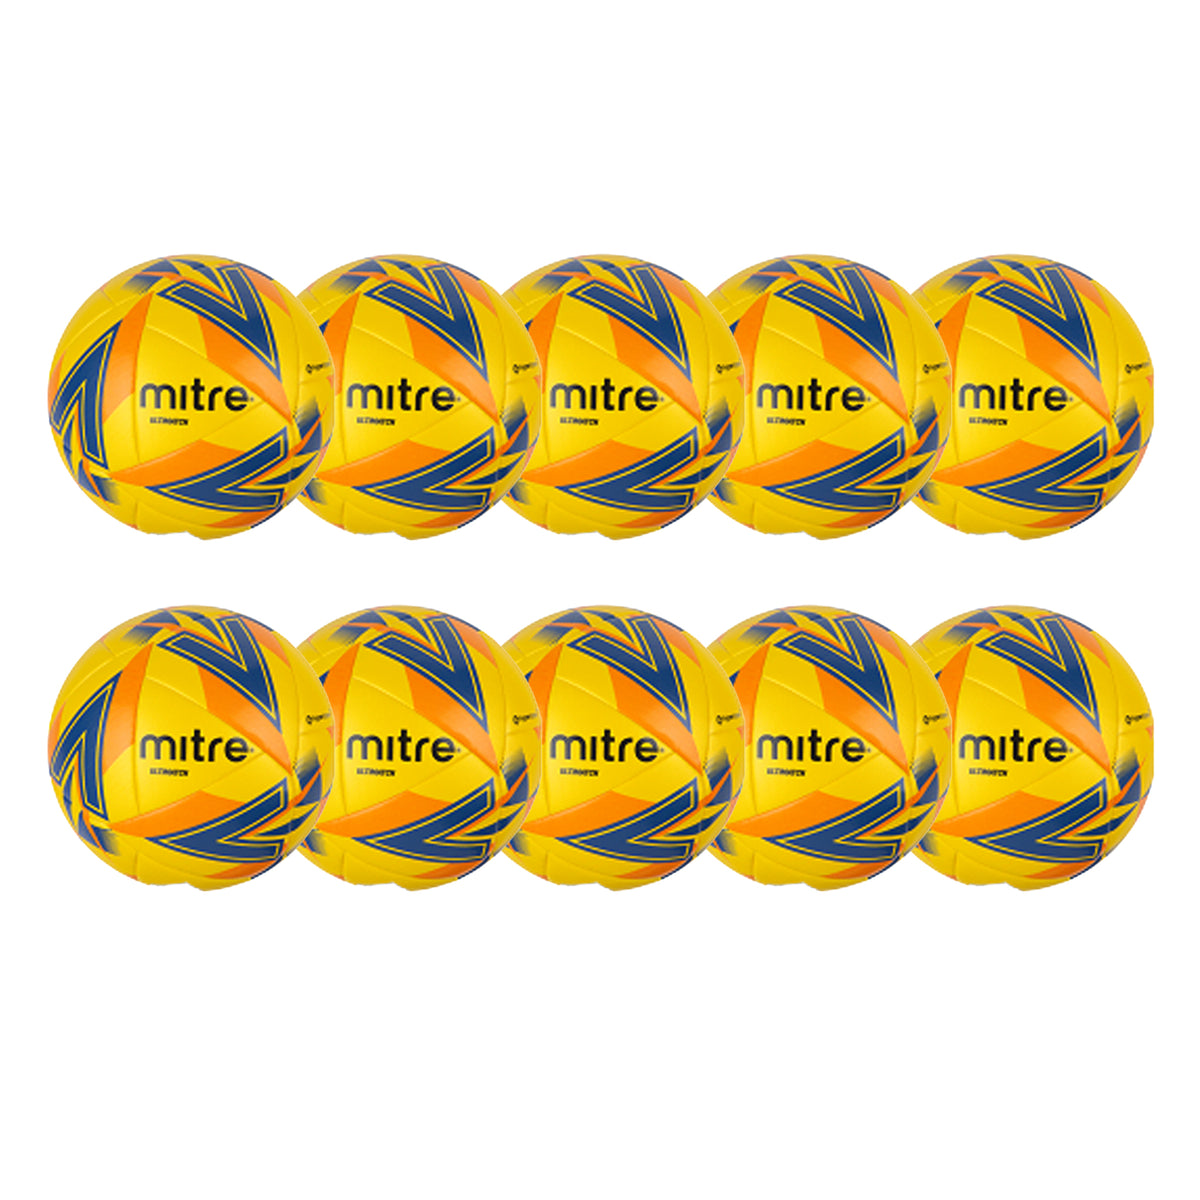 Mitre Ultimatch One Football (Pack of 10): Yellow